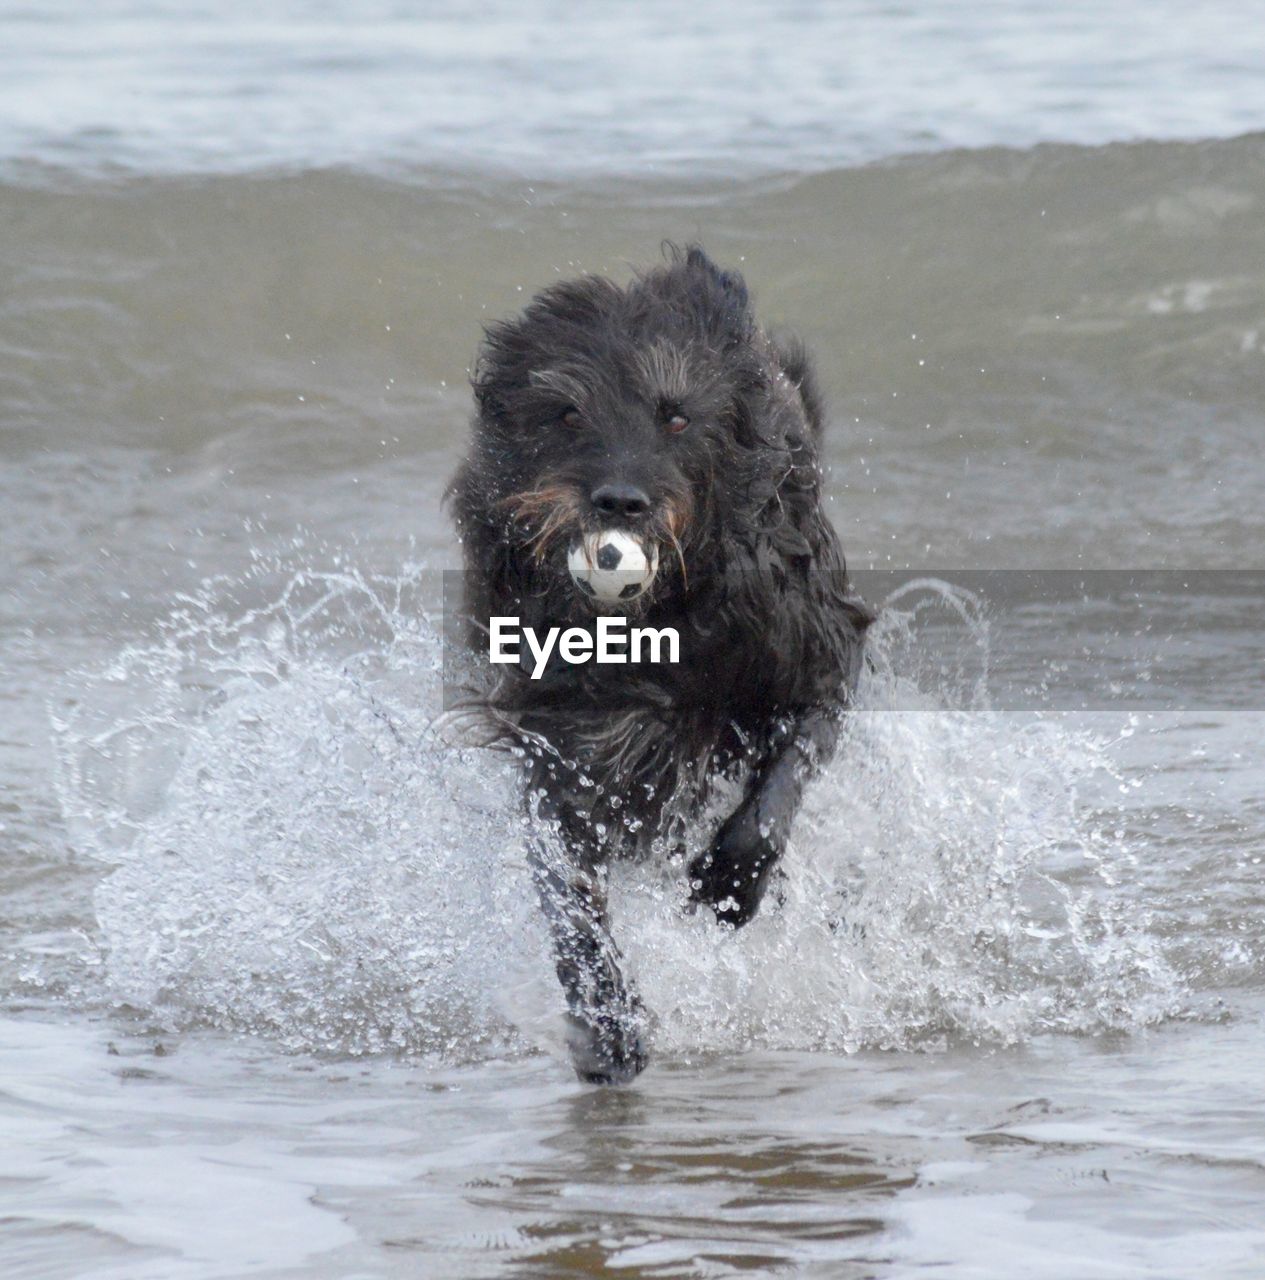 Dog carrying ball in mouth at shore